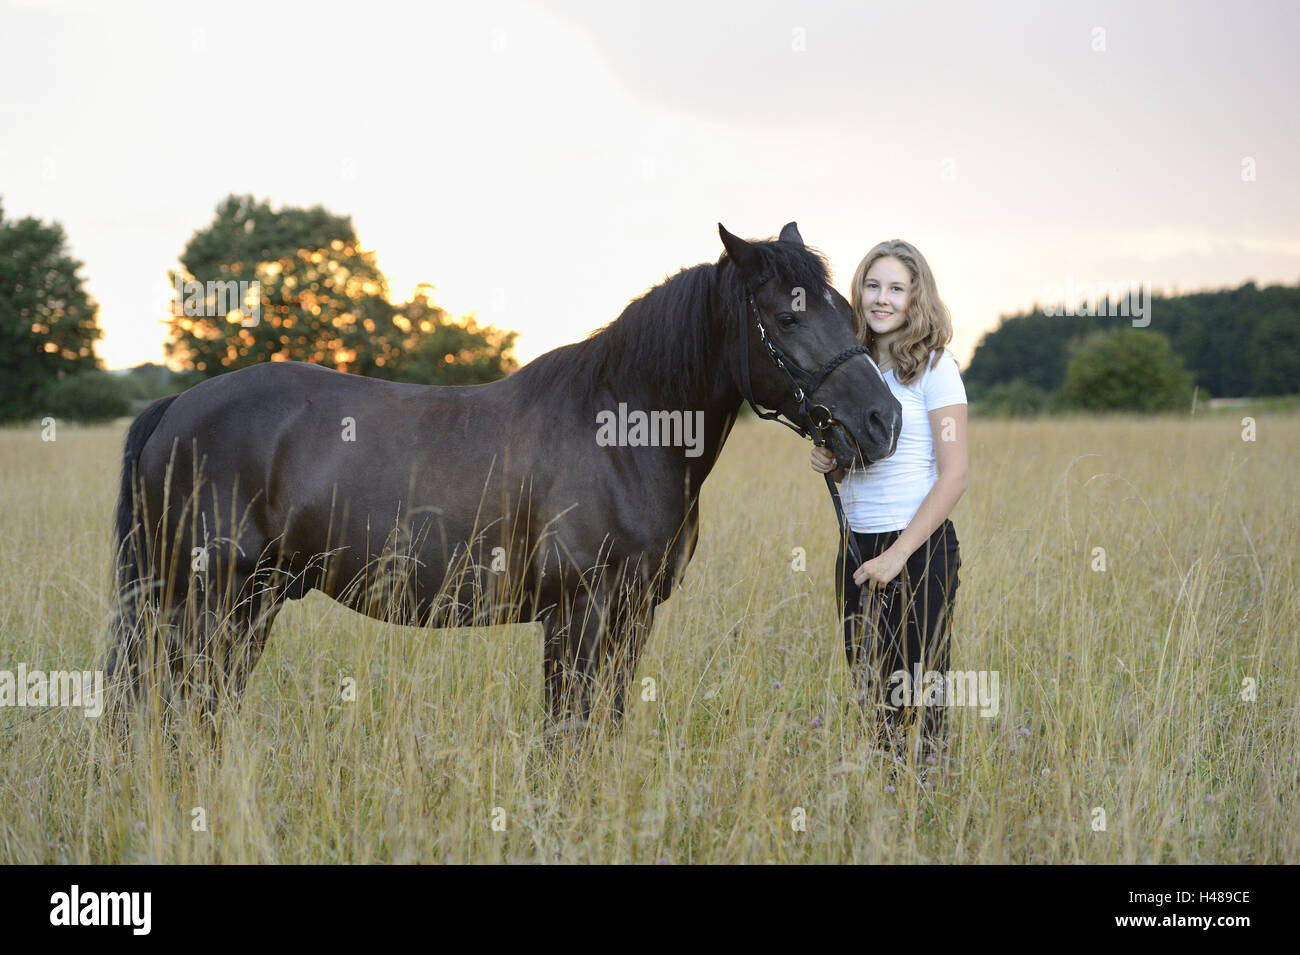 Girl, horse, meadow, standing, looking at camera, landscape, Stock Photo